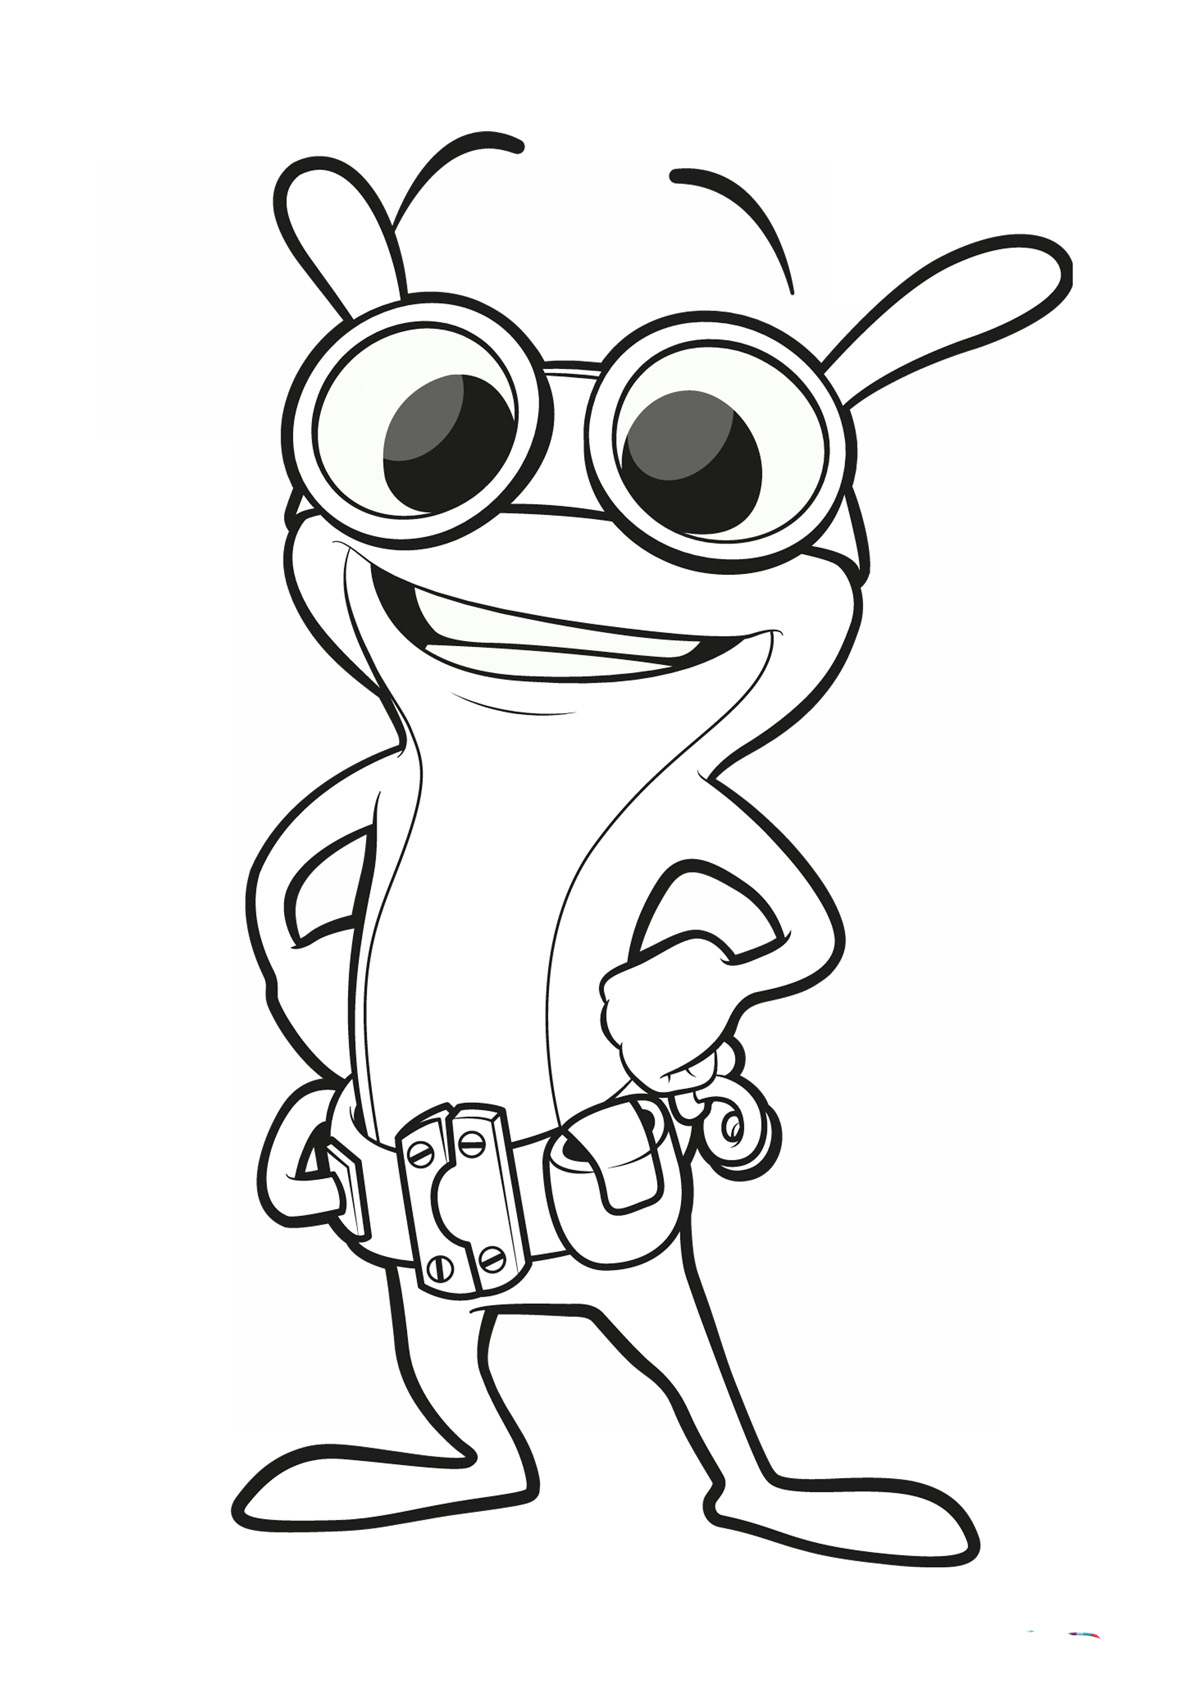 Kate and MimMim coloring pages to download and print for free